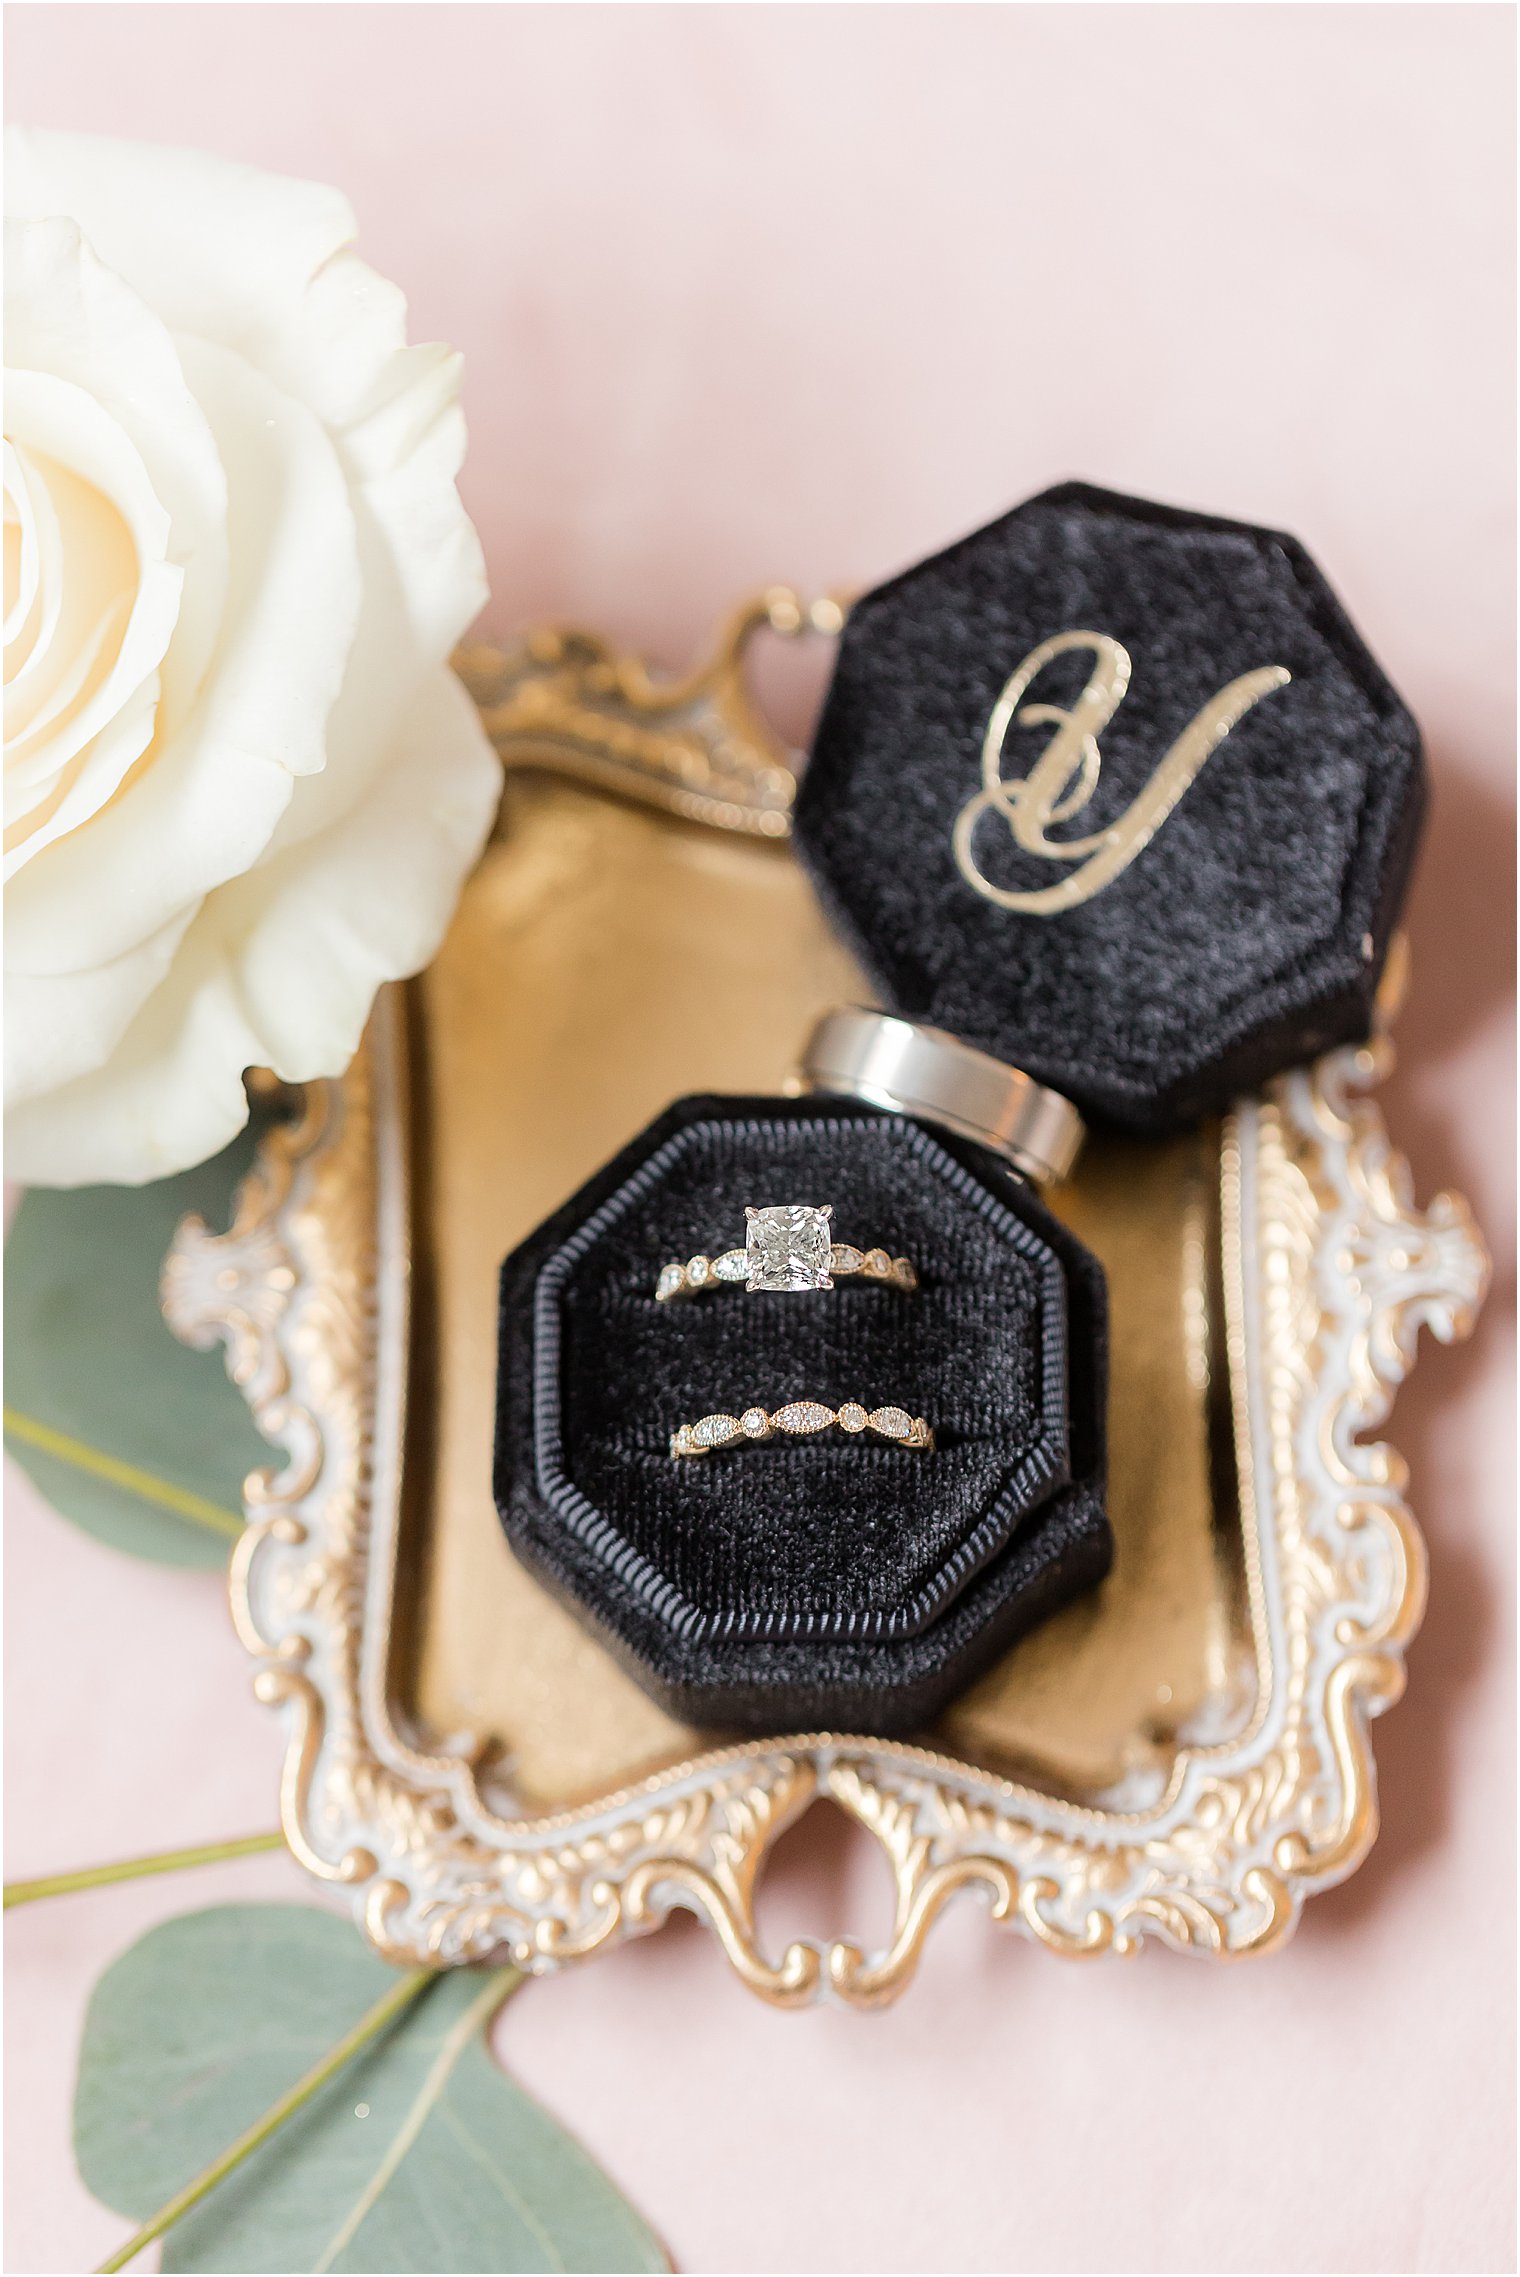 wedding rings rest in black ring box on gold tray